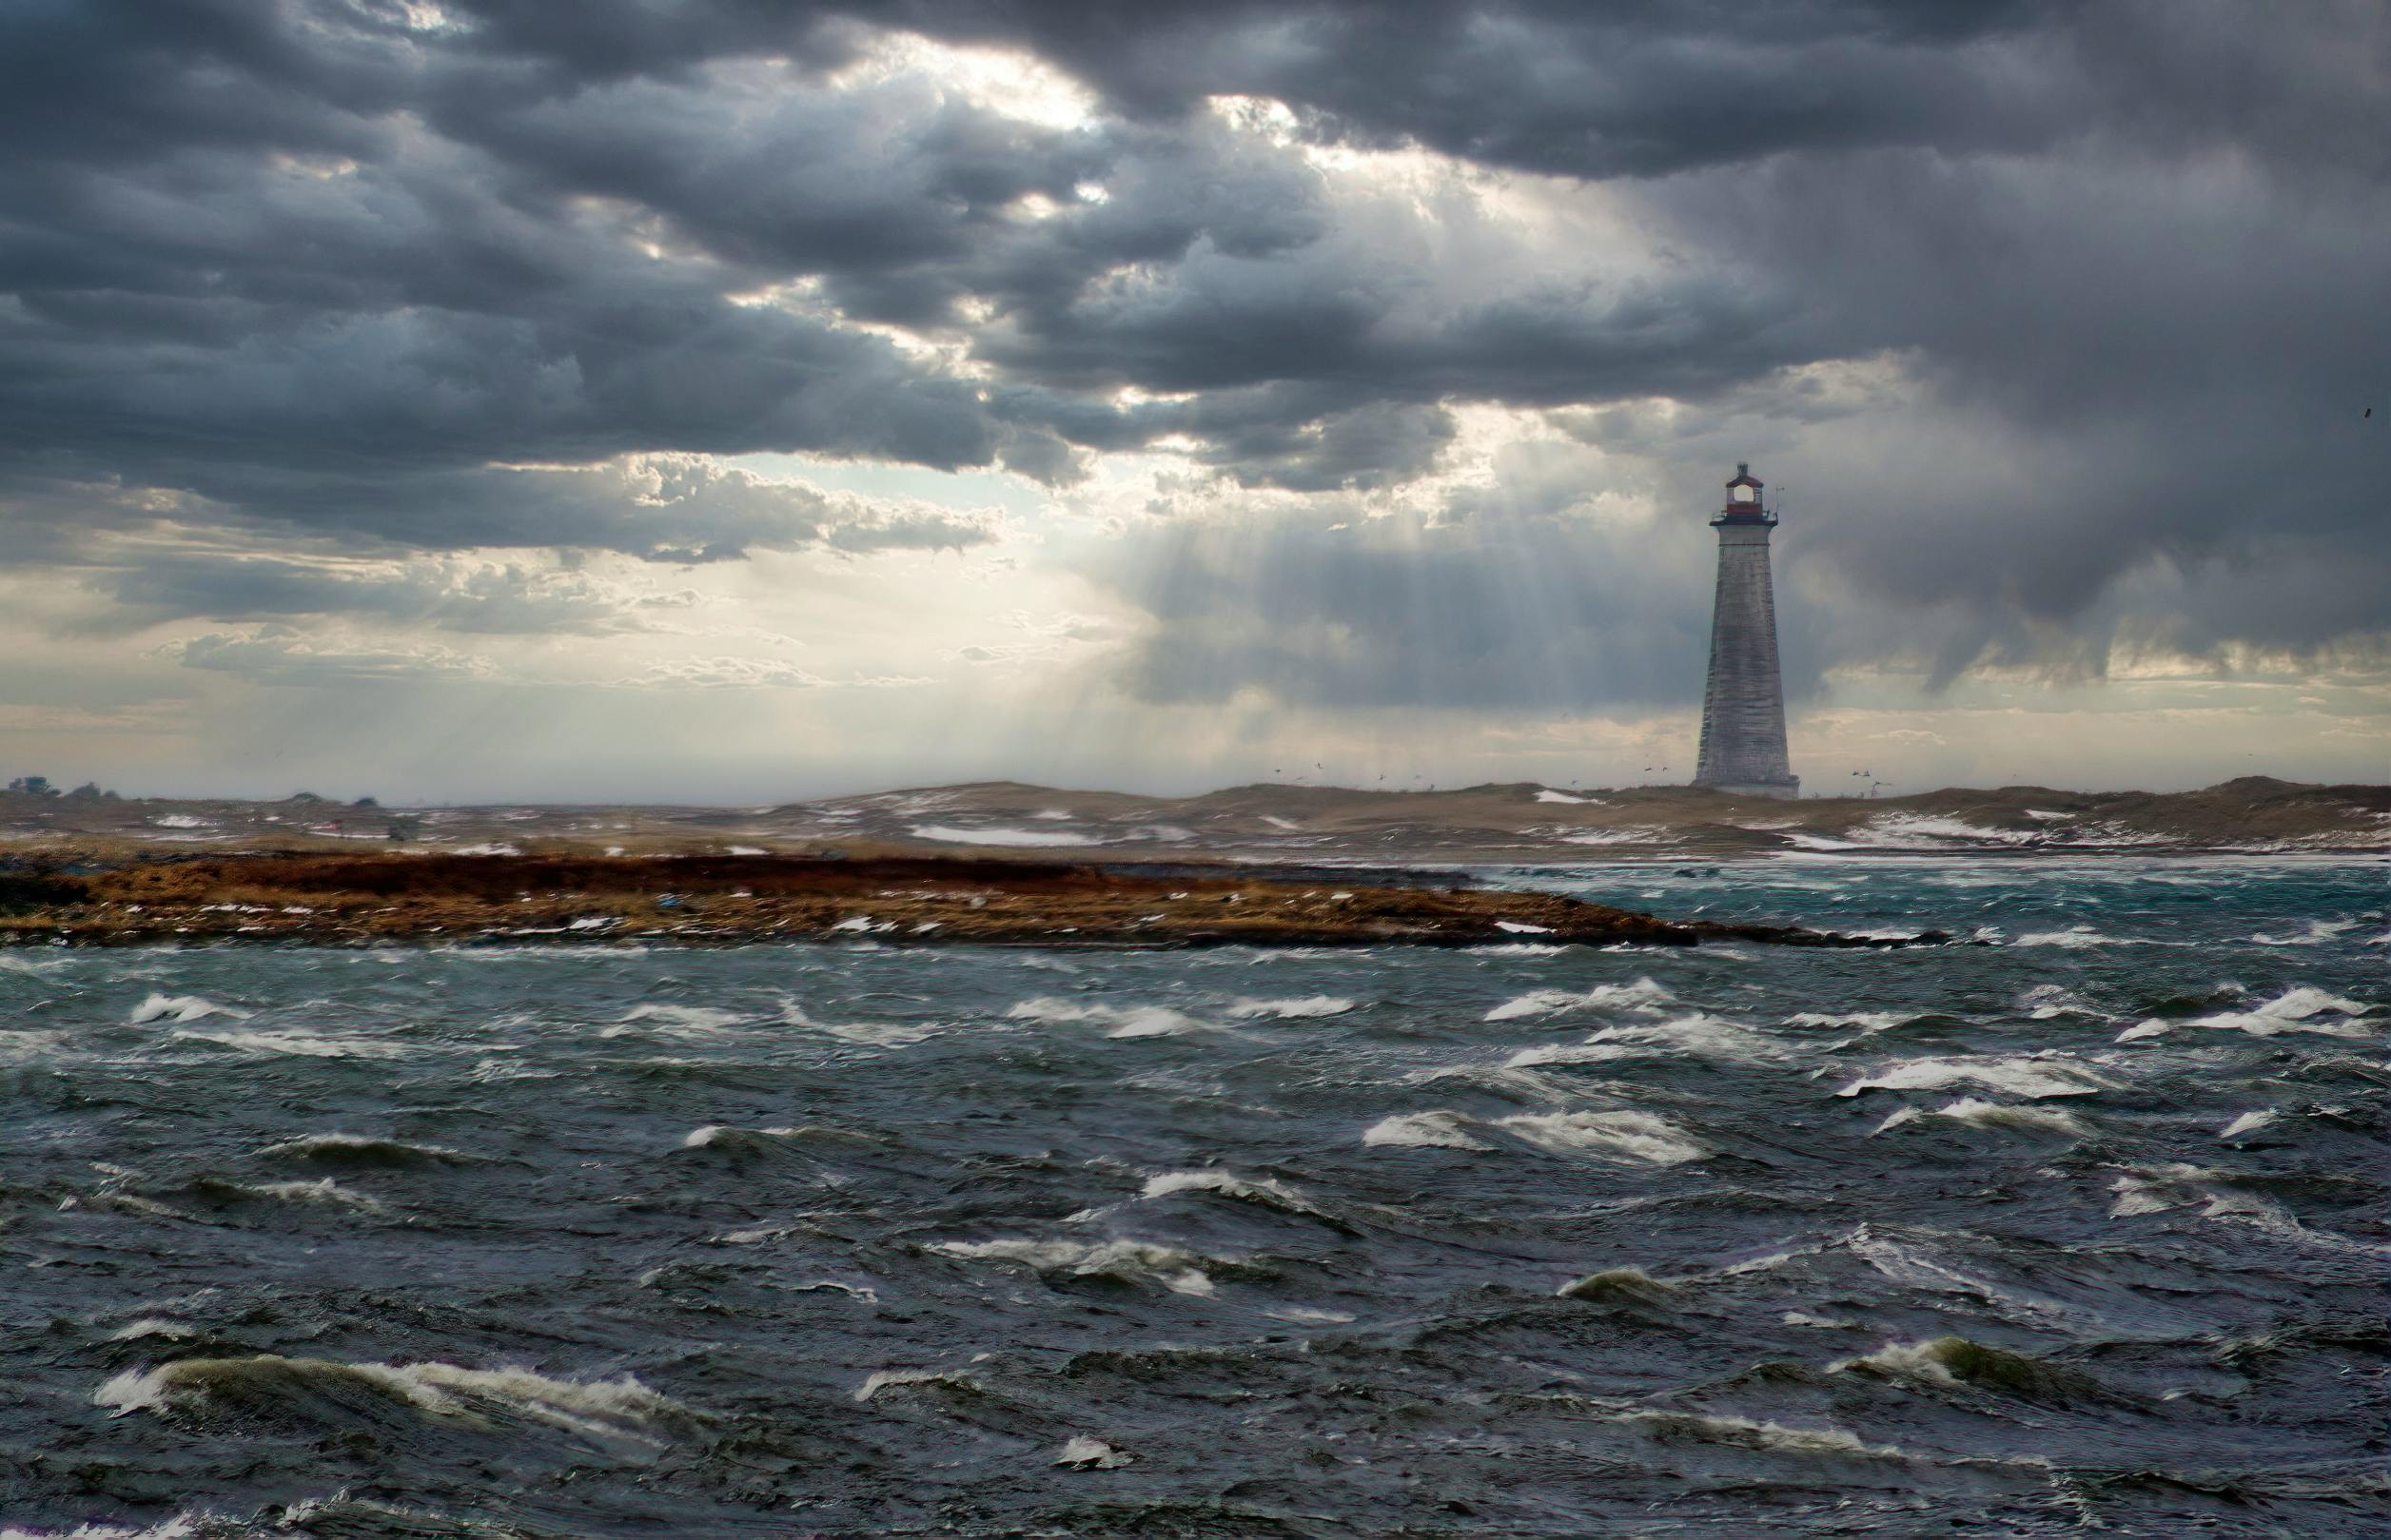 Clark Swimm photographed this ominous view of the Cape Sable Lighthouse from The Hawk, N.S. It is the most southerly point in Nova Scotia on Cape Sable Island. Clark noted the day was blustery with strong northwest winds, which is certainly evident in the photograph. The Cape Sable Lighthouse is the tallest in the province, standing at 101 feet tall. Thanks for sharing, Clark.